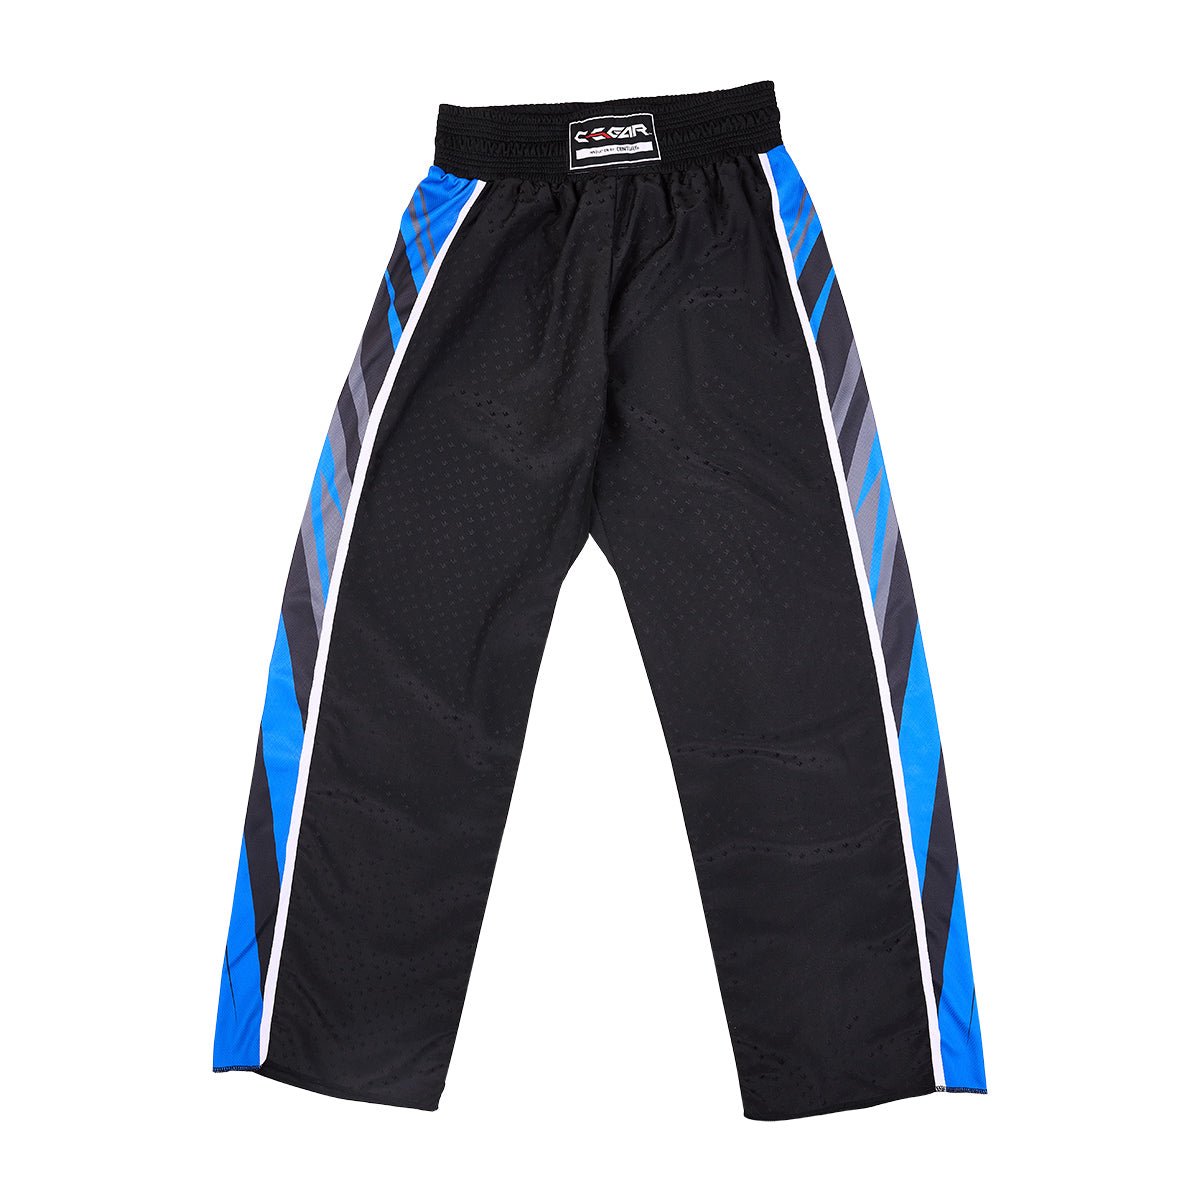 All-round martial arts pants